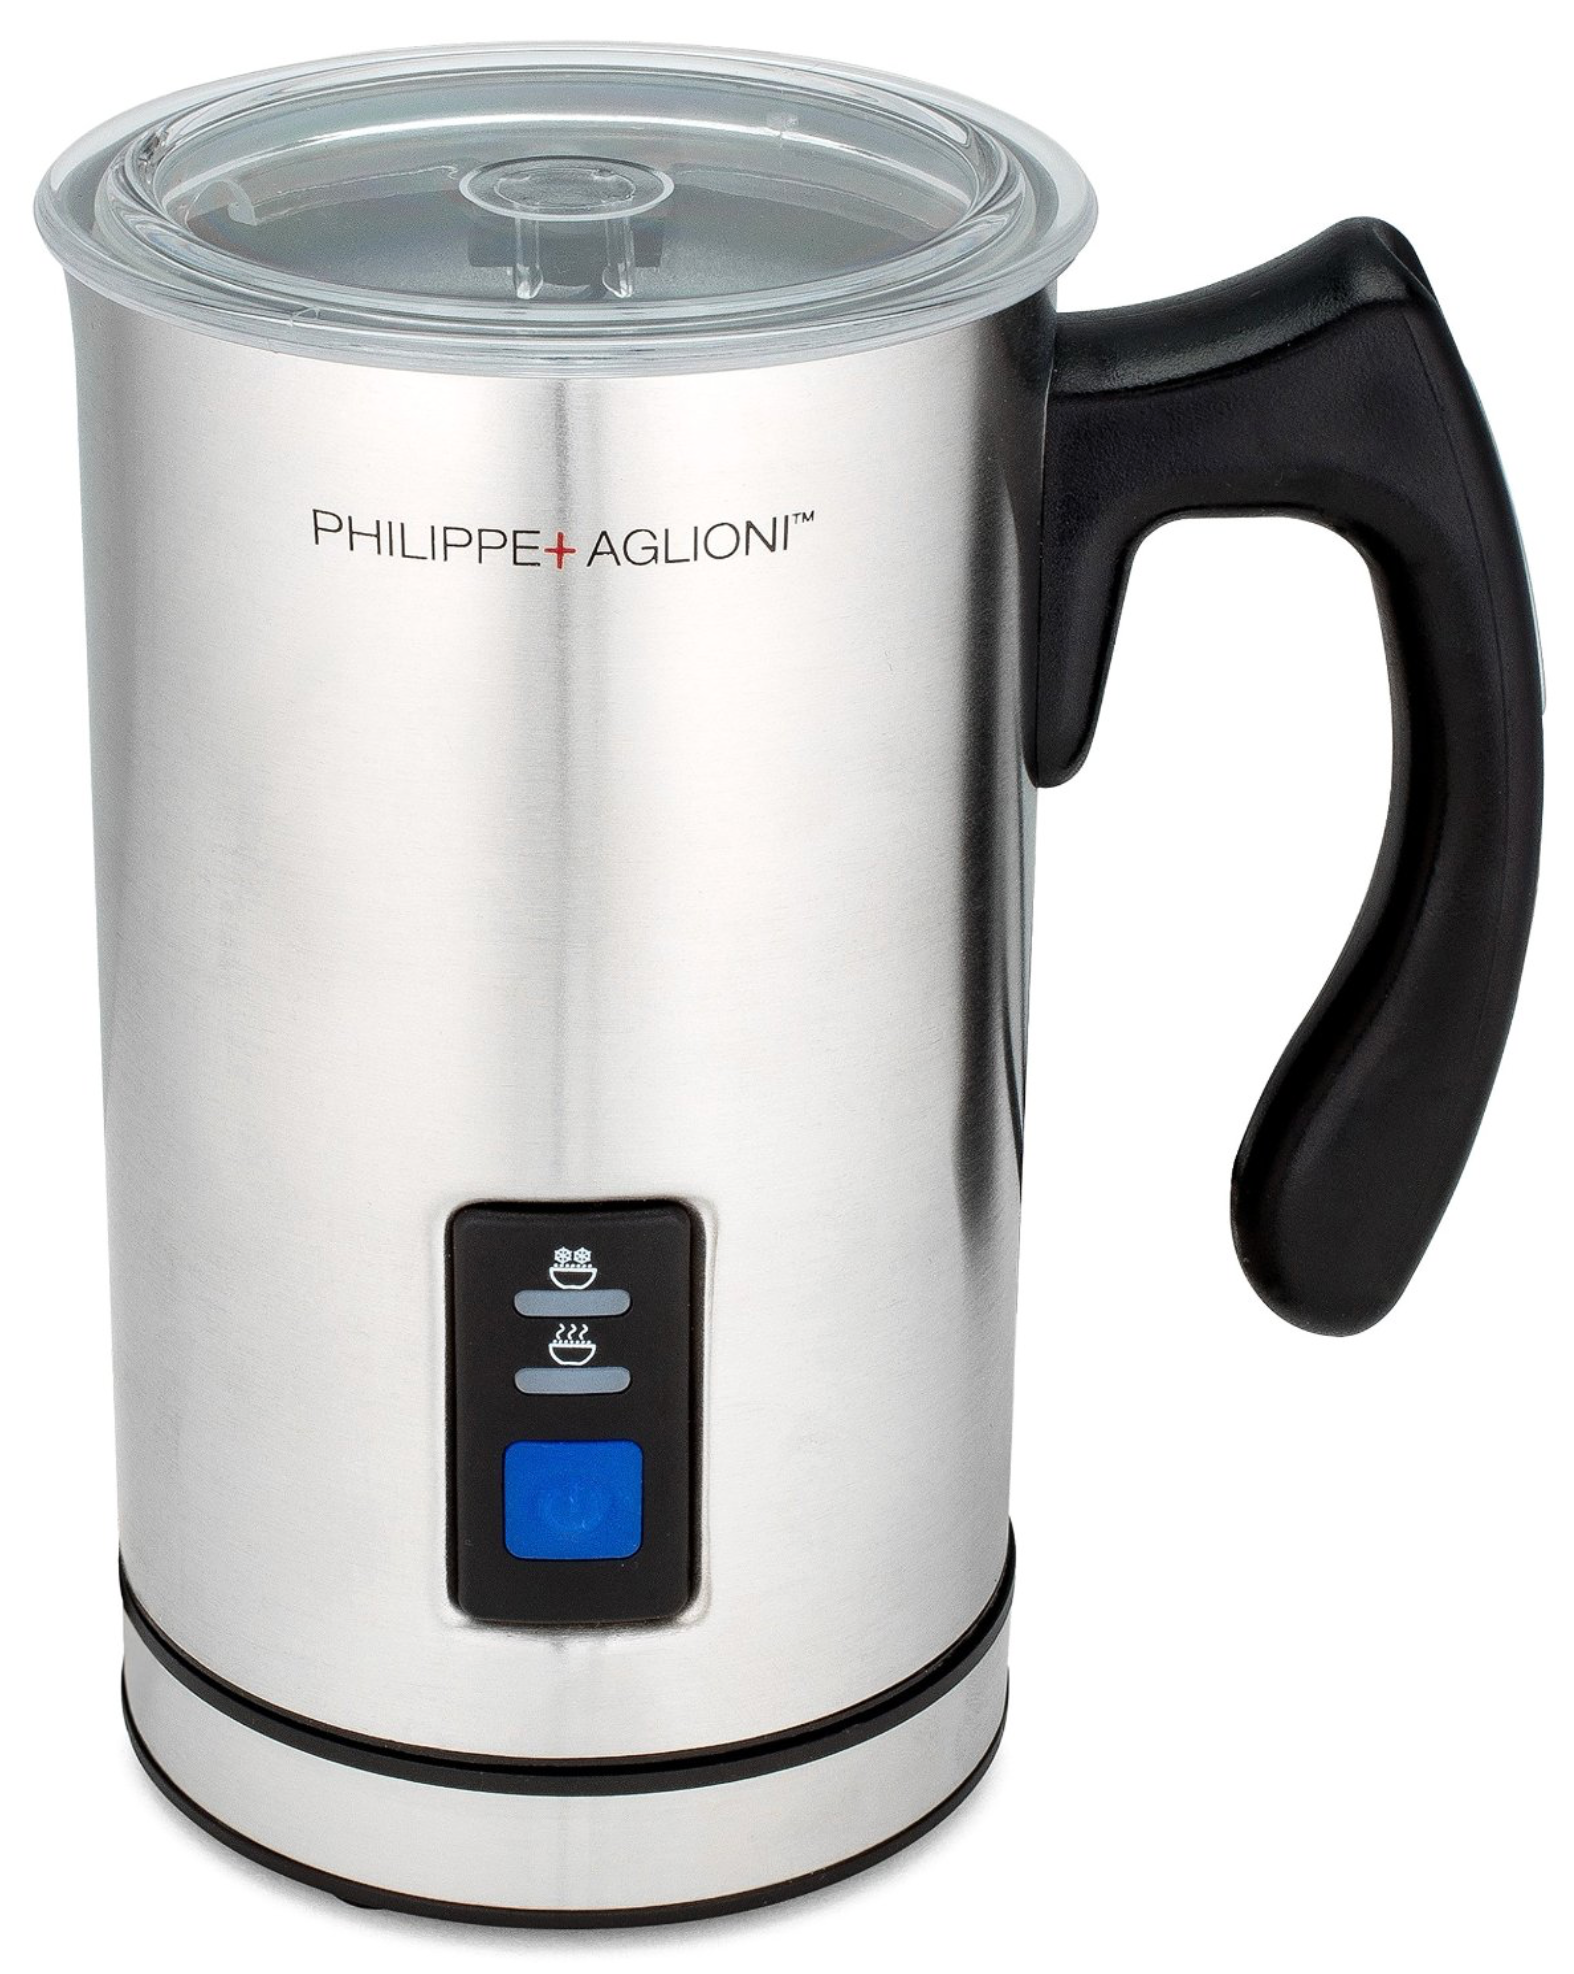 https://www.brownscoffee.com/wp-content/uploads/2016/04/MatchaDNA-Automatic-Milk-Frother-Heater-and-Cappuccino-Making-Carafe-by-Phillipe-Taglioni.png